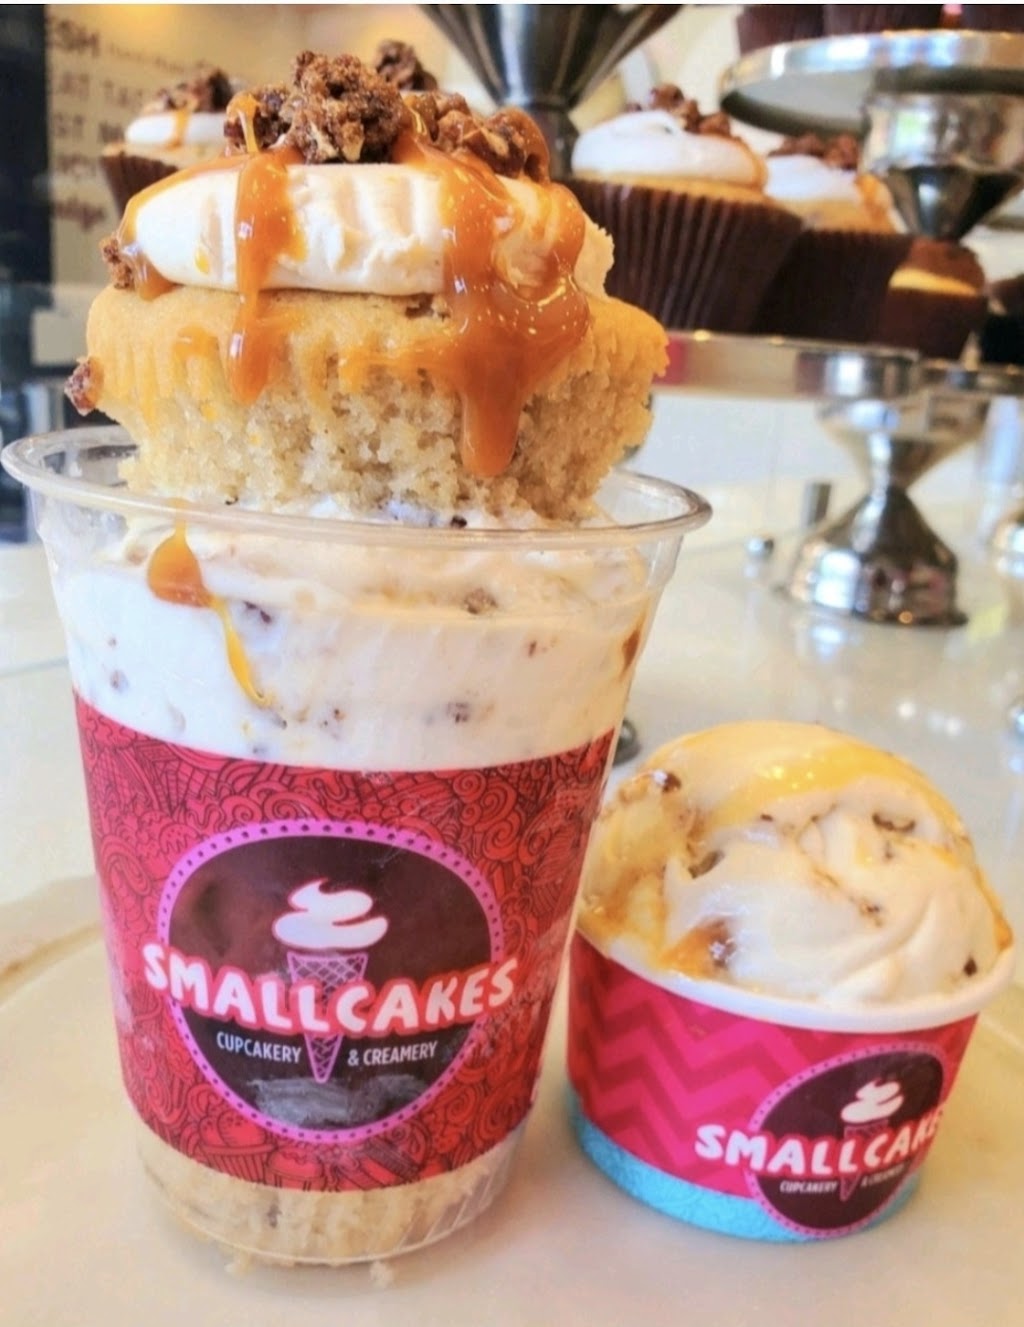 Smallcakes Buford: A Cupcakery and Creamery | The Exchange at Gwinnett, 2925 Buford Dr Ste 1220, Buford, GA 30519, USA | Phone: (770) 224-8033